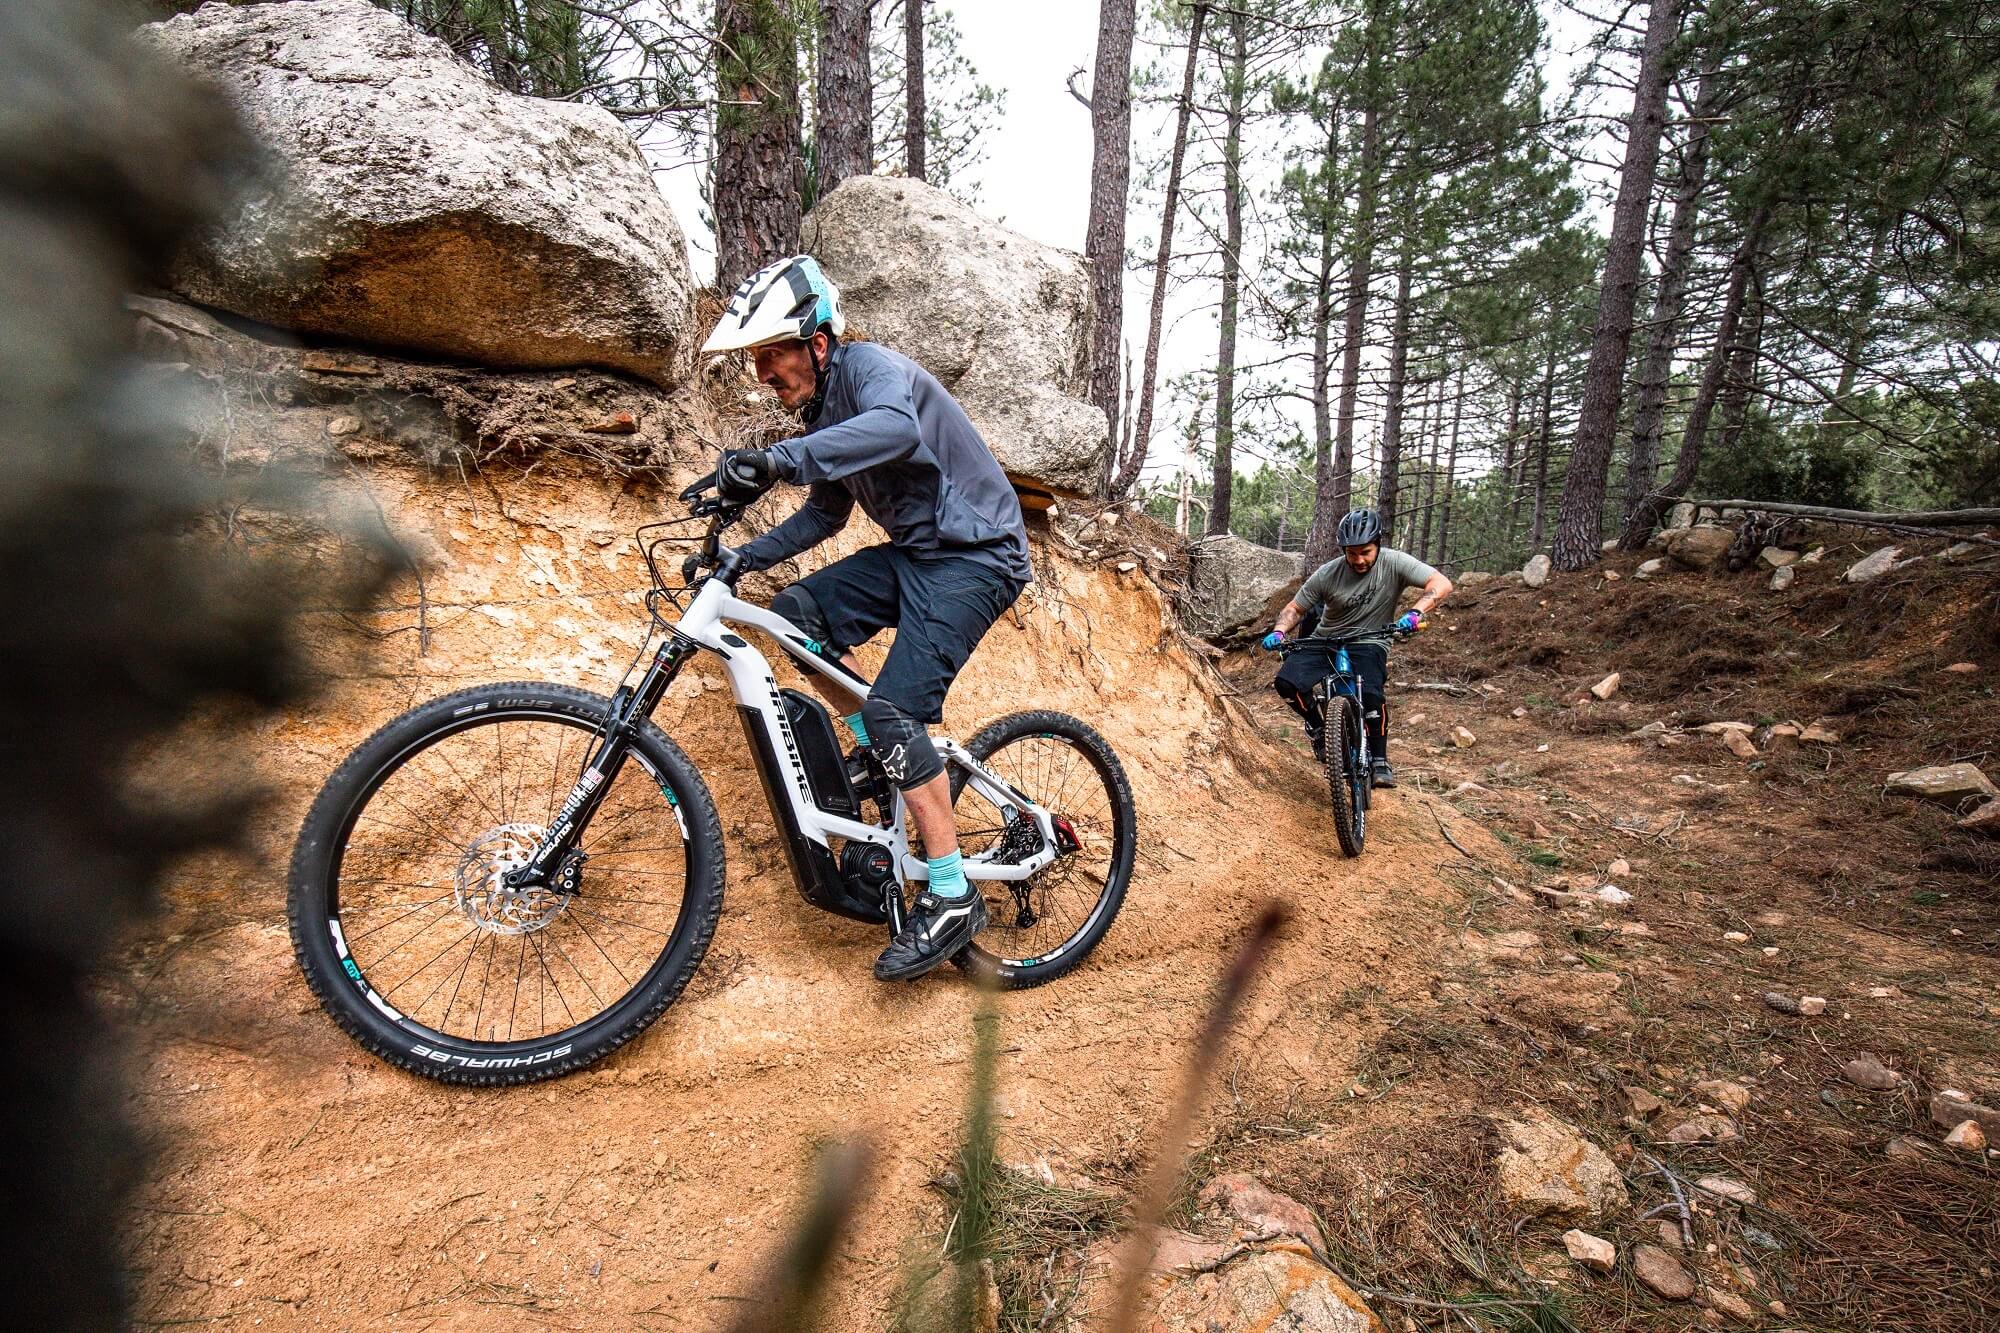 Haibike Heroes Tom Cardy and Yannick Granieri riding on Bosch Gen 4 eMTBs on Corsica